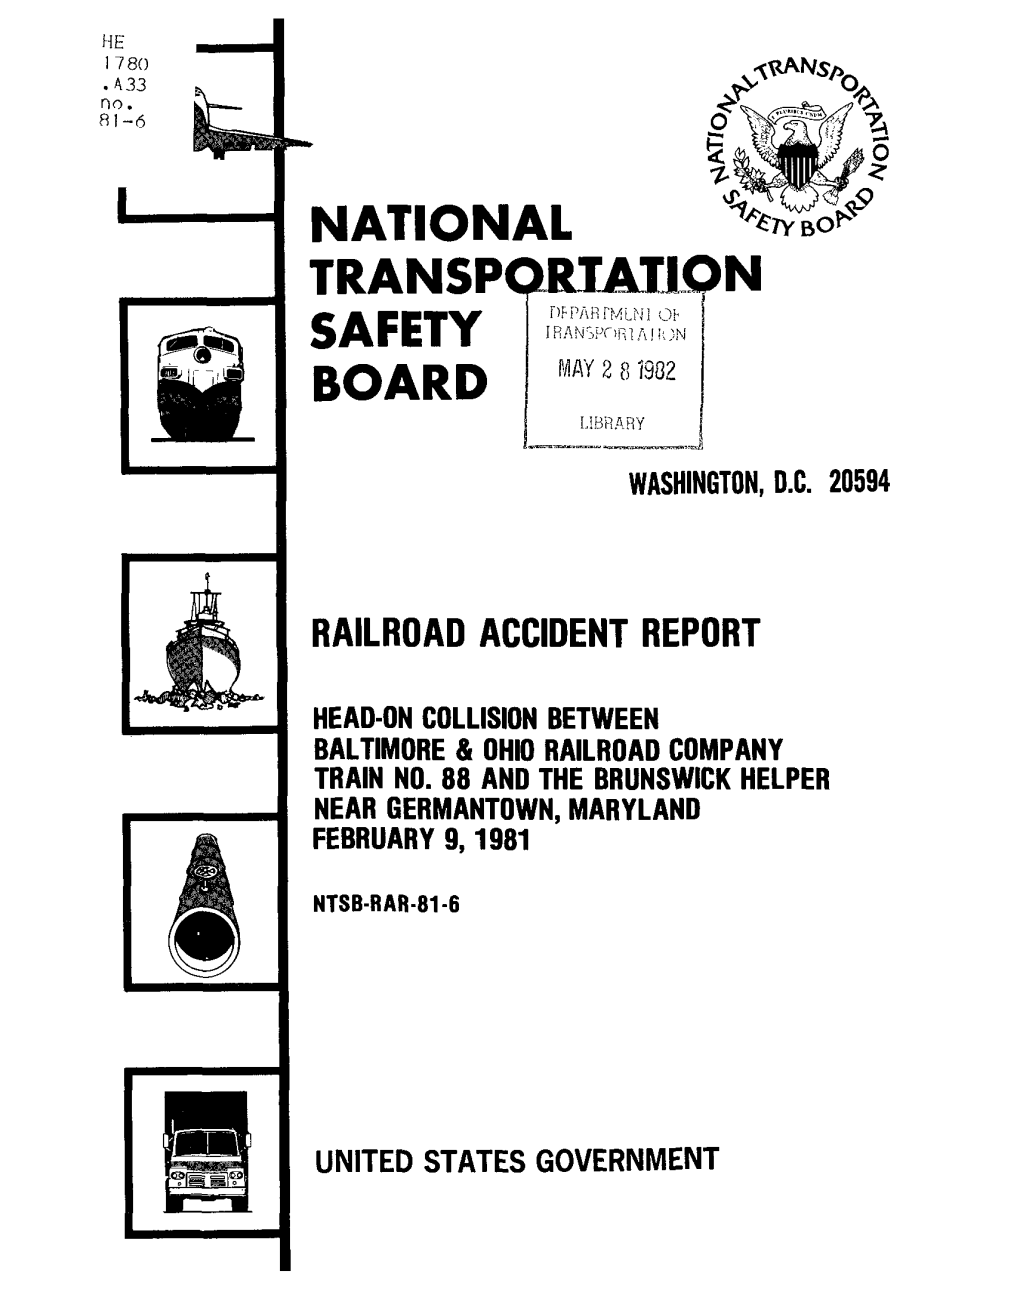 National Transportation Safety Board 11.Contract Or Grant No